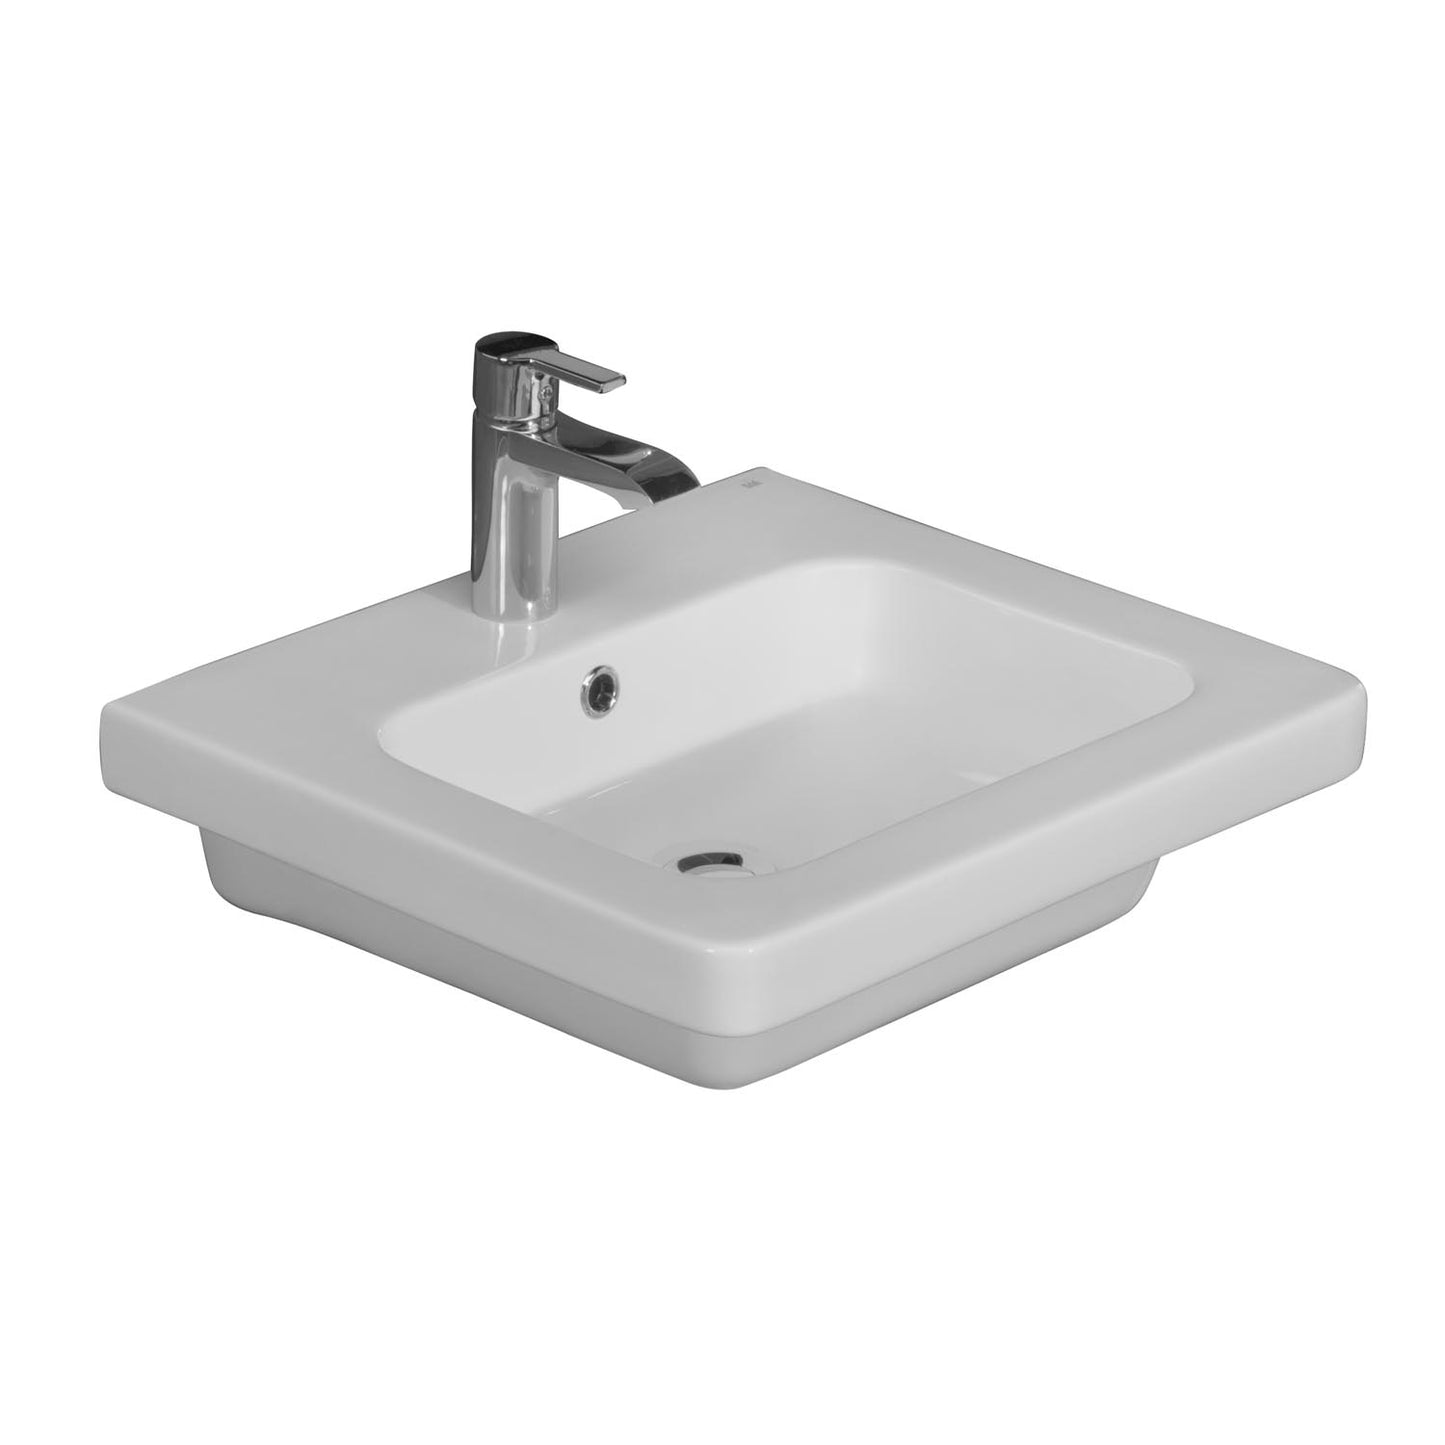 Resort 550 Wall Hung Bathroom Sink White For 4" Centerset Faucet